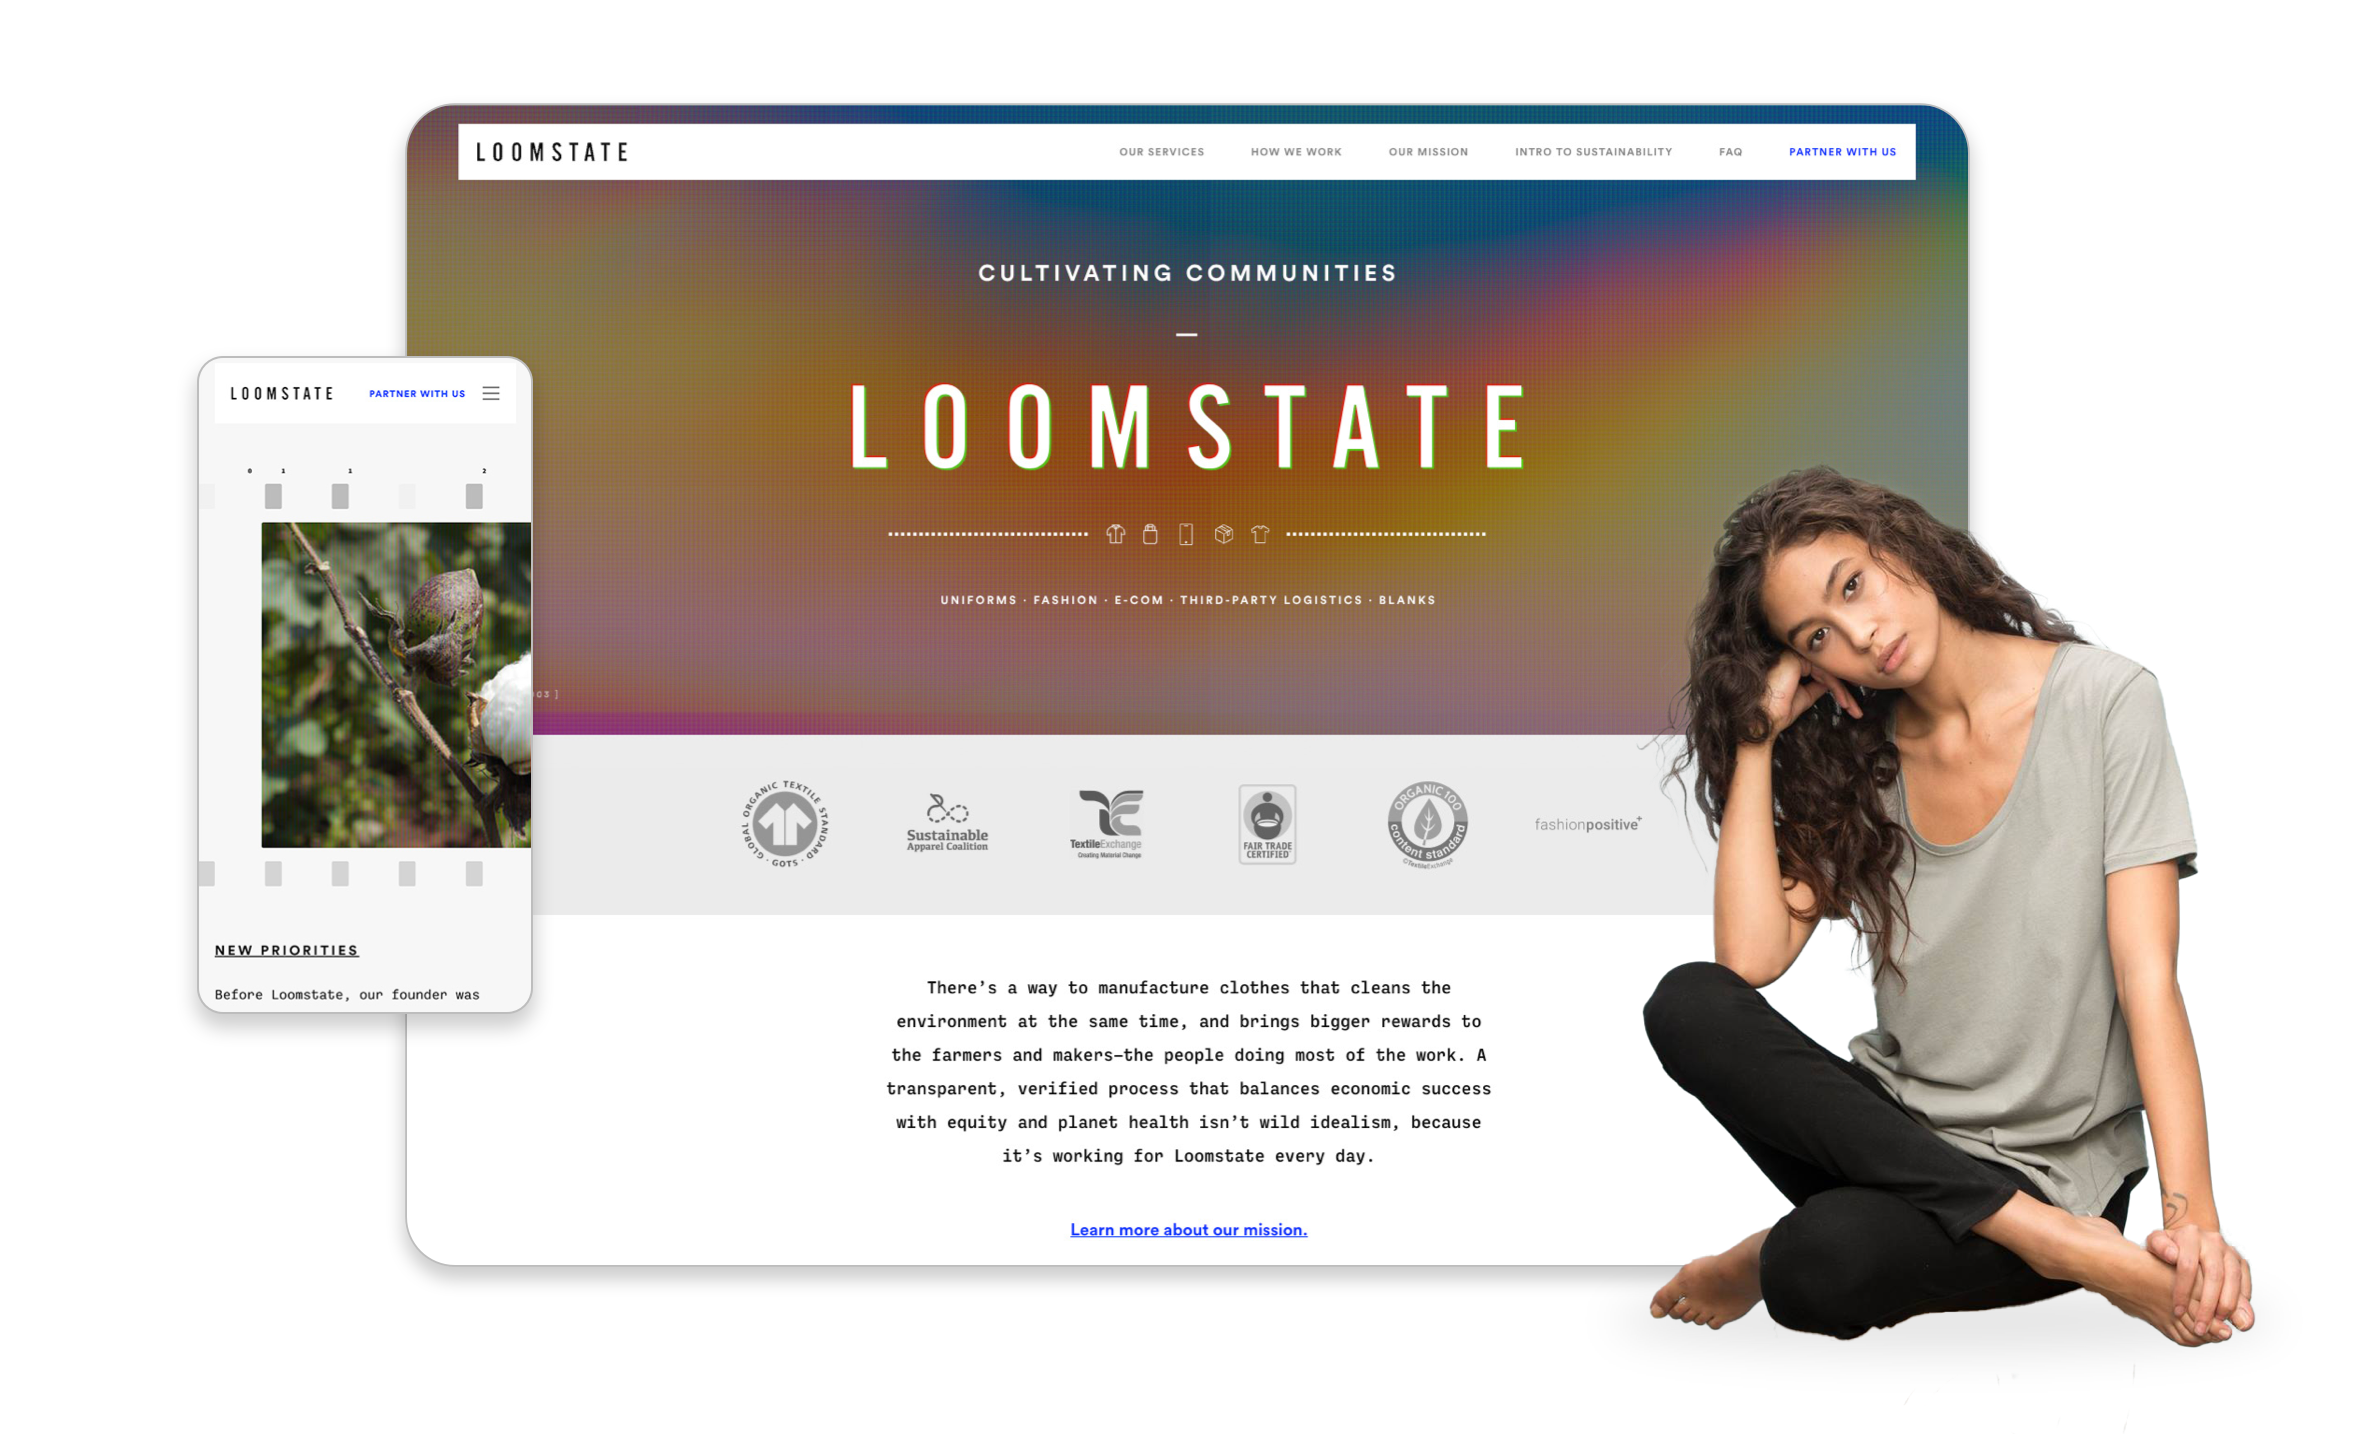 Looomstate's new customer portal is benefitting from improved platform performance, faster feature implementation and an intuitive user interface.